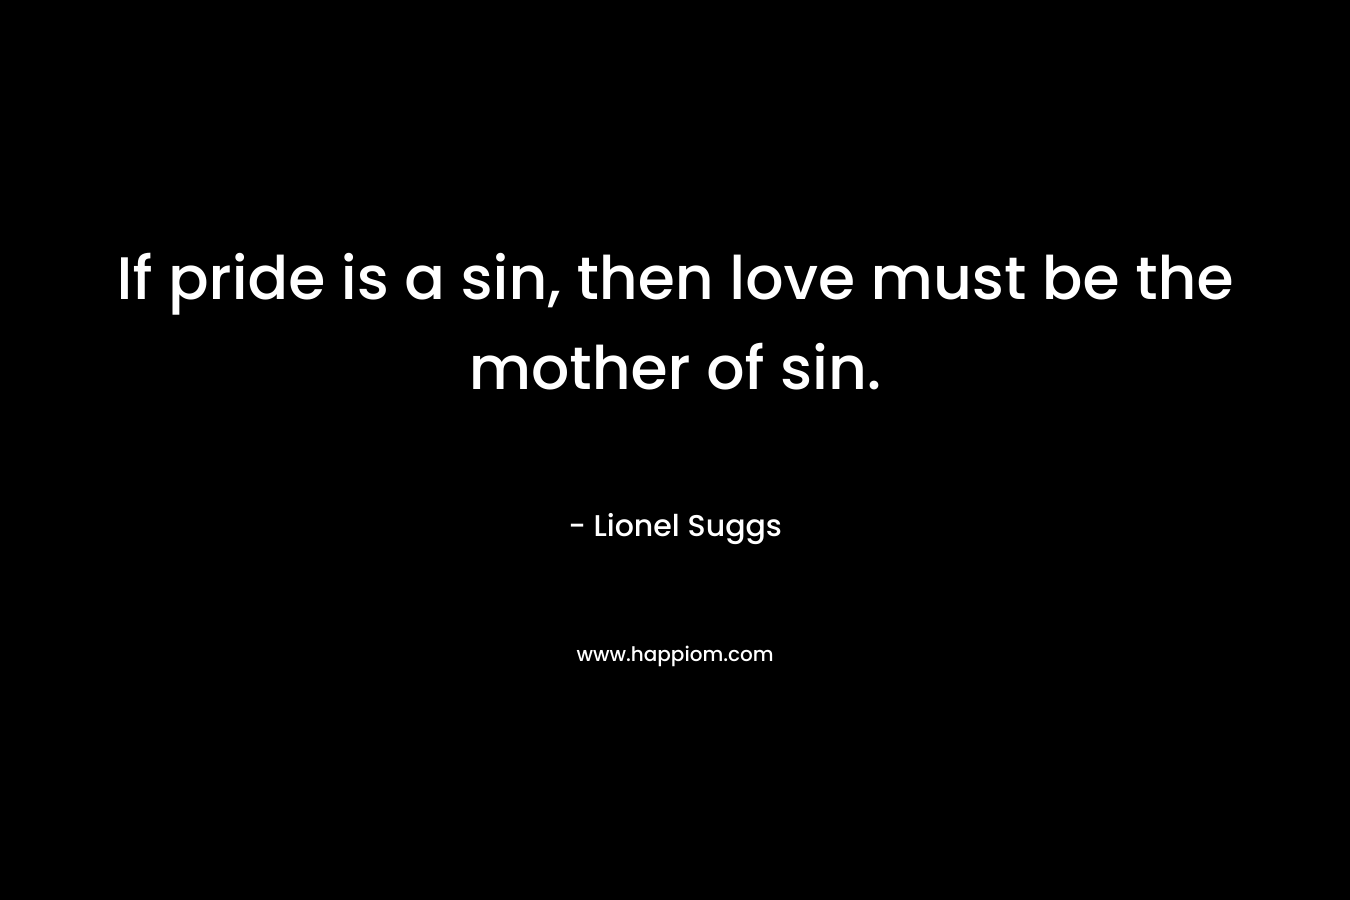 If pride is a sin, then love must be the mother of sin.